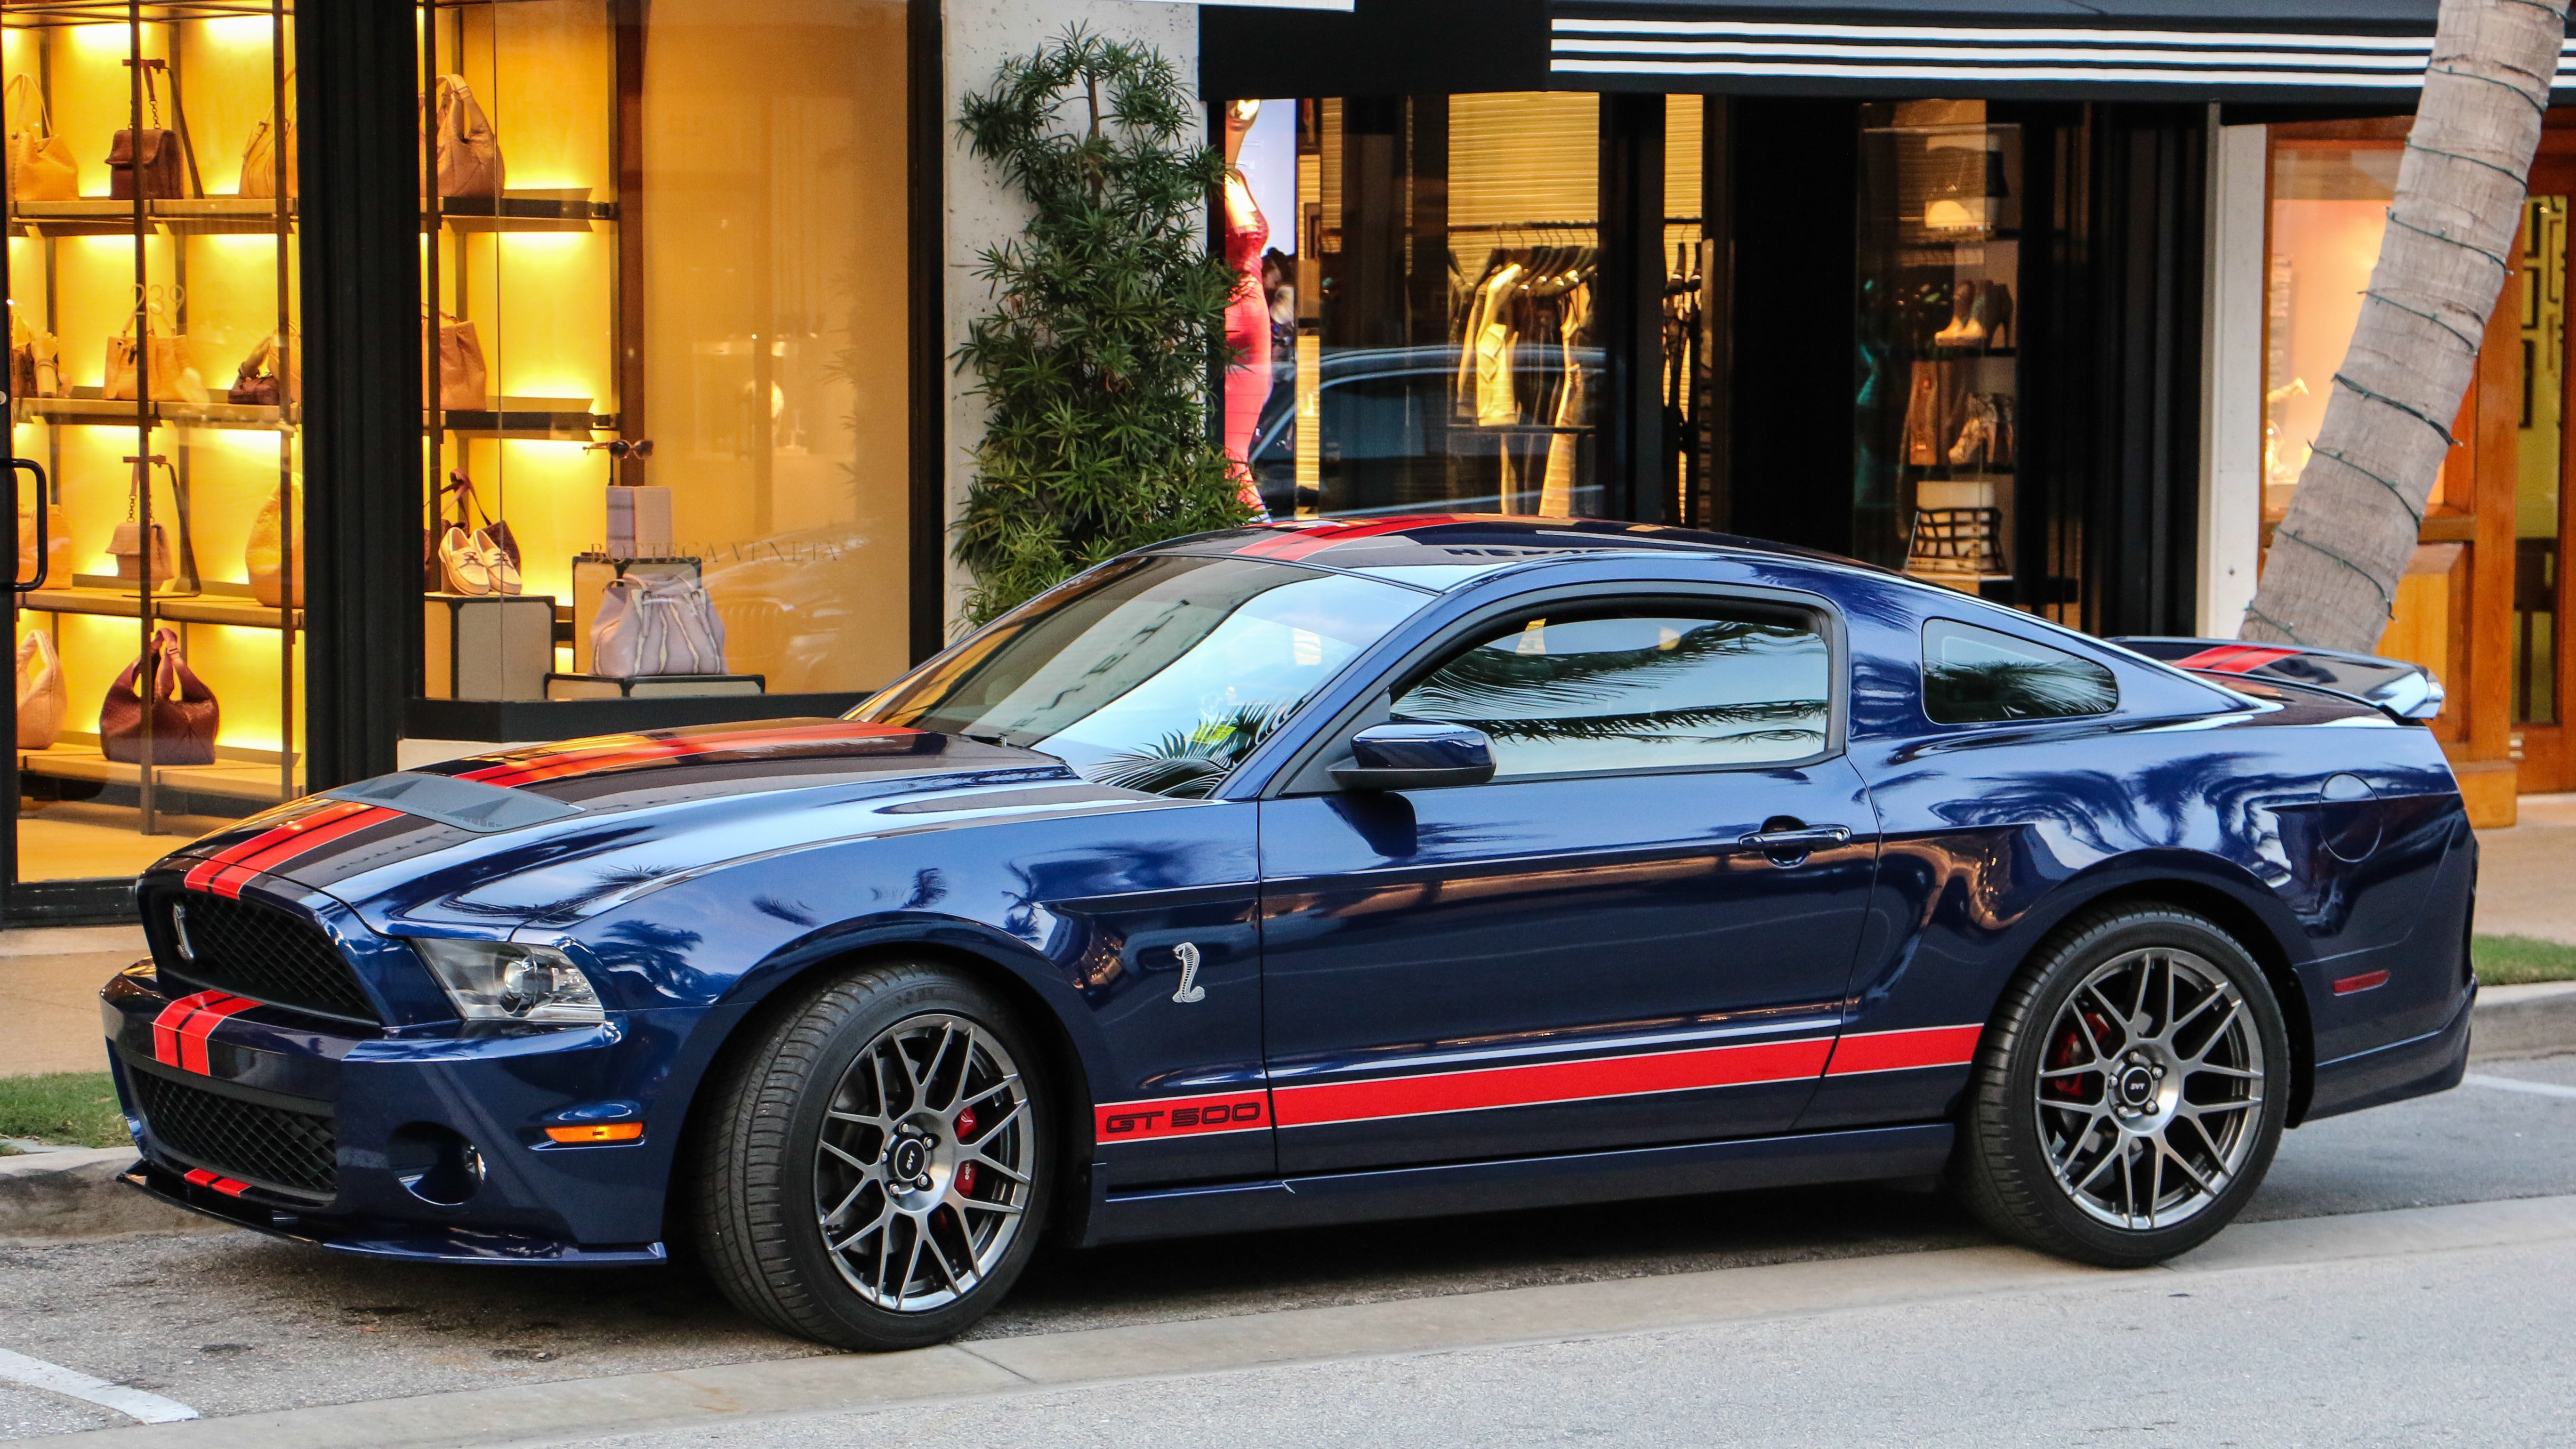 blue Ford Mustang Cobra, sports car, muscle cars, Ford Mustang Shelby